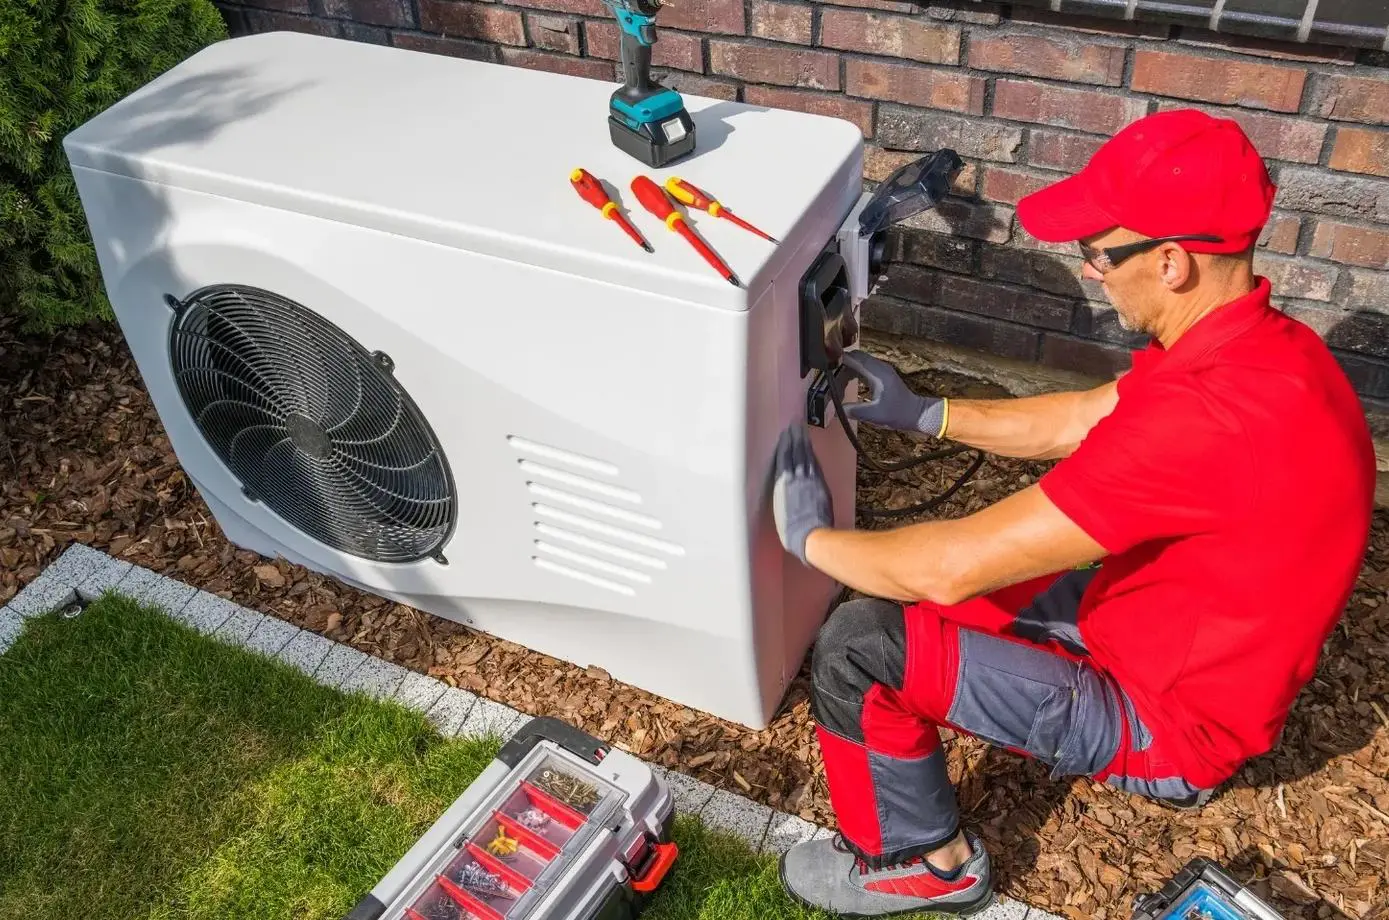 A man in red shirt fixing air conditioner.